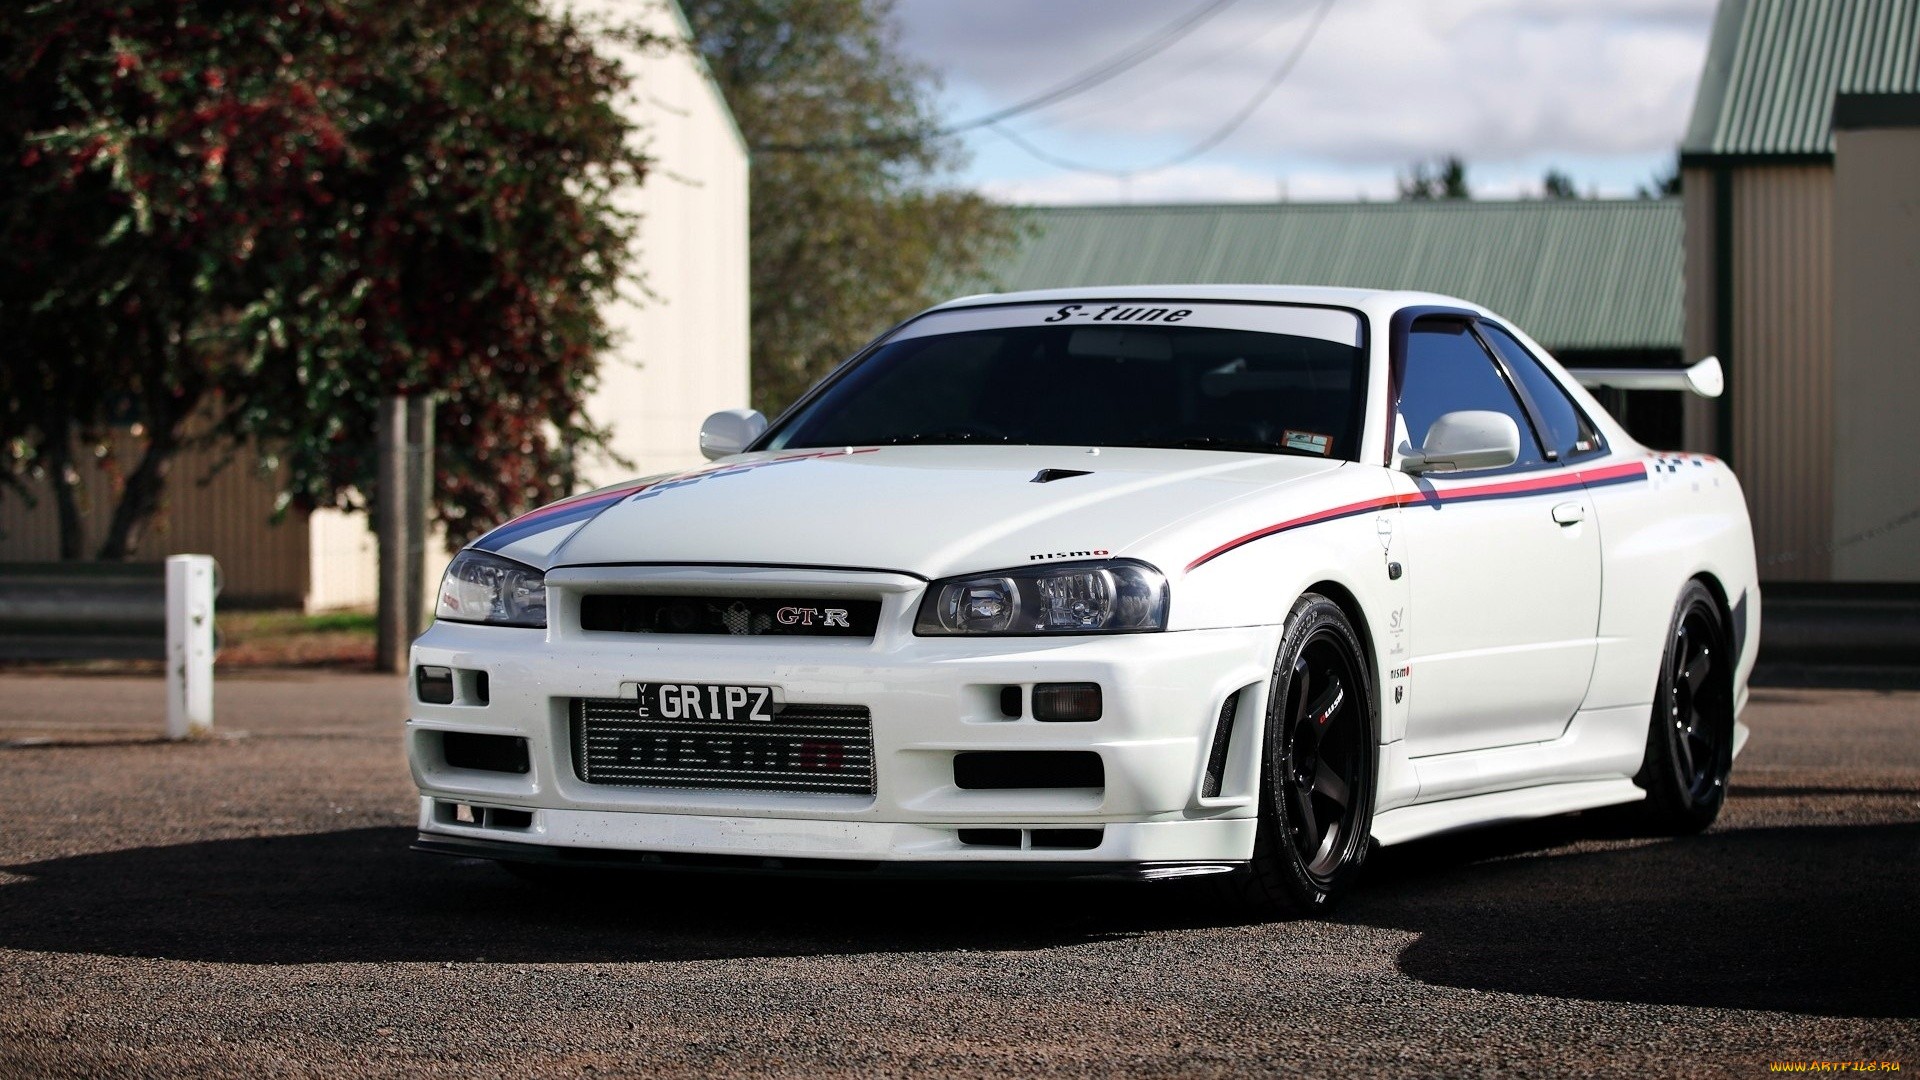 Free Download Nissan Skyline R34 Supercar Tuning White Wallpaper 19x1080 For Your Desktop Mobile Tablet Explore 98 Nissan R34 Wallpapers Nissan R34 Wallpapers Nissan Gtr R34 Wallpaper Nissan Skyline R34 Wallpaper